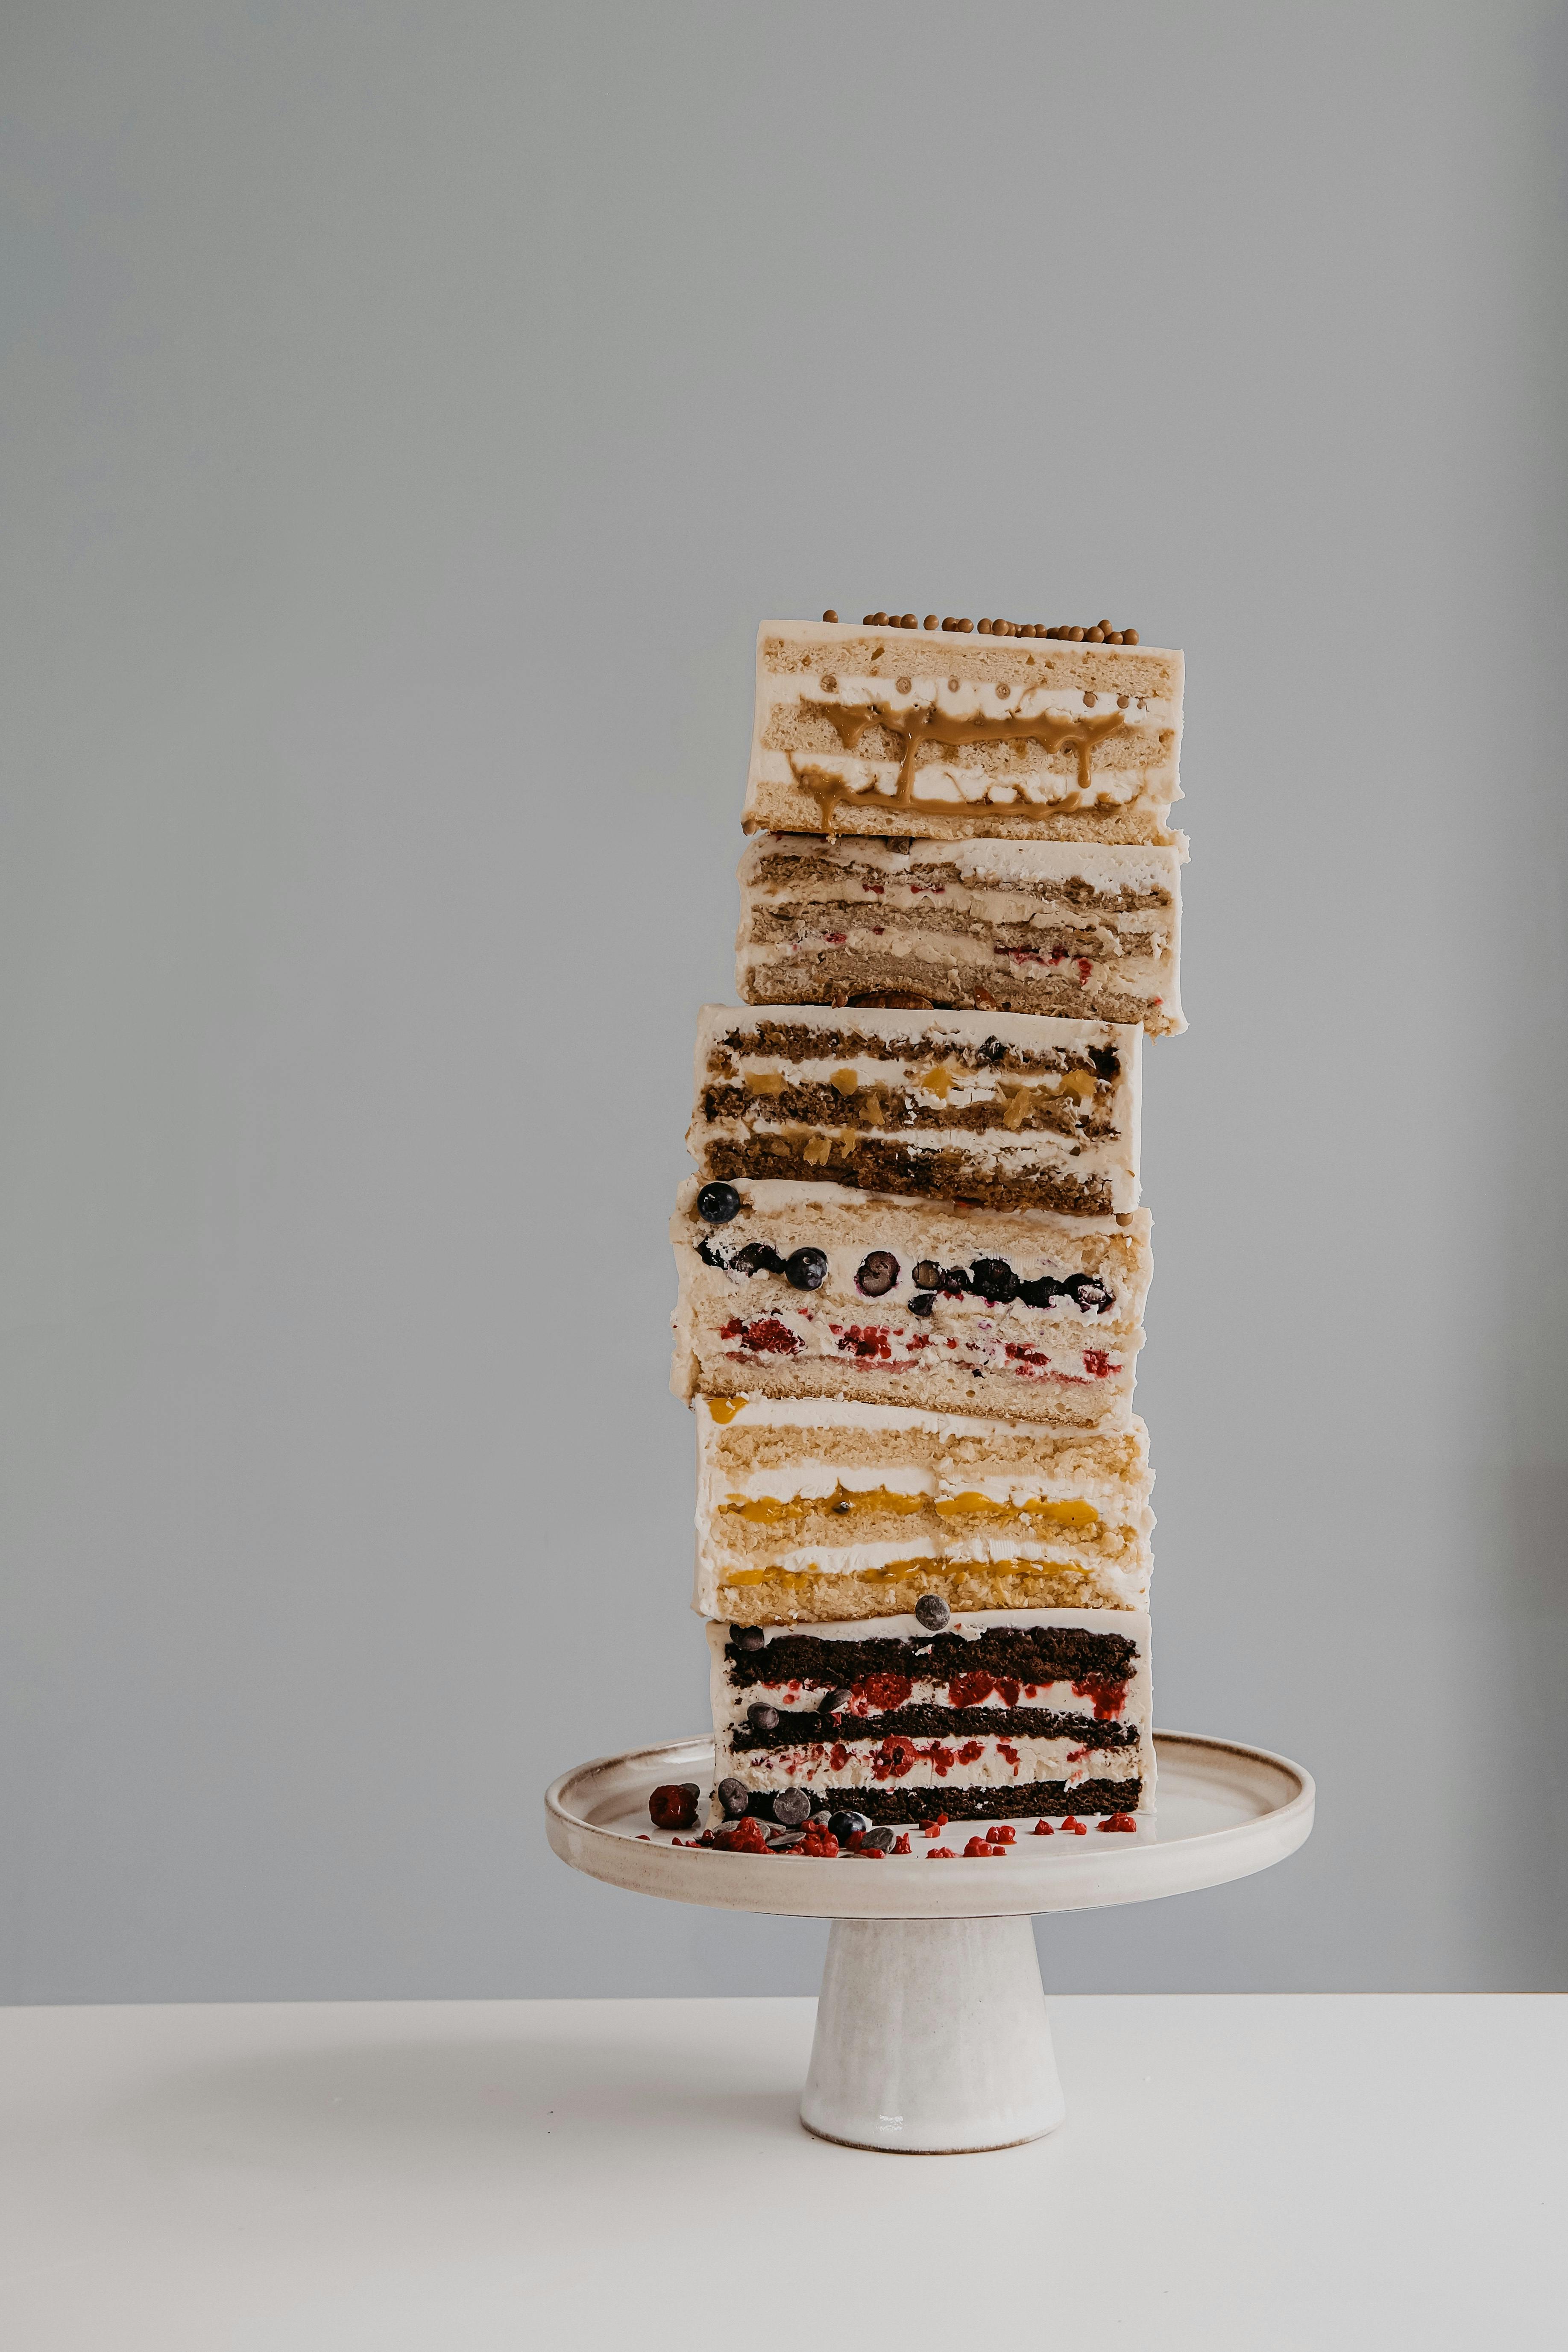 stacks of sliced cakes on a cakestand